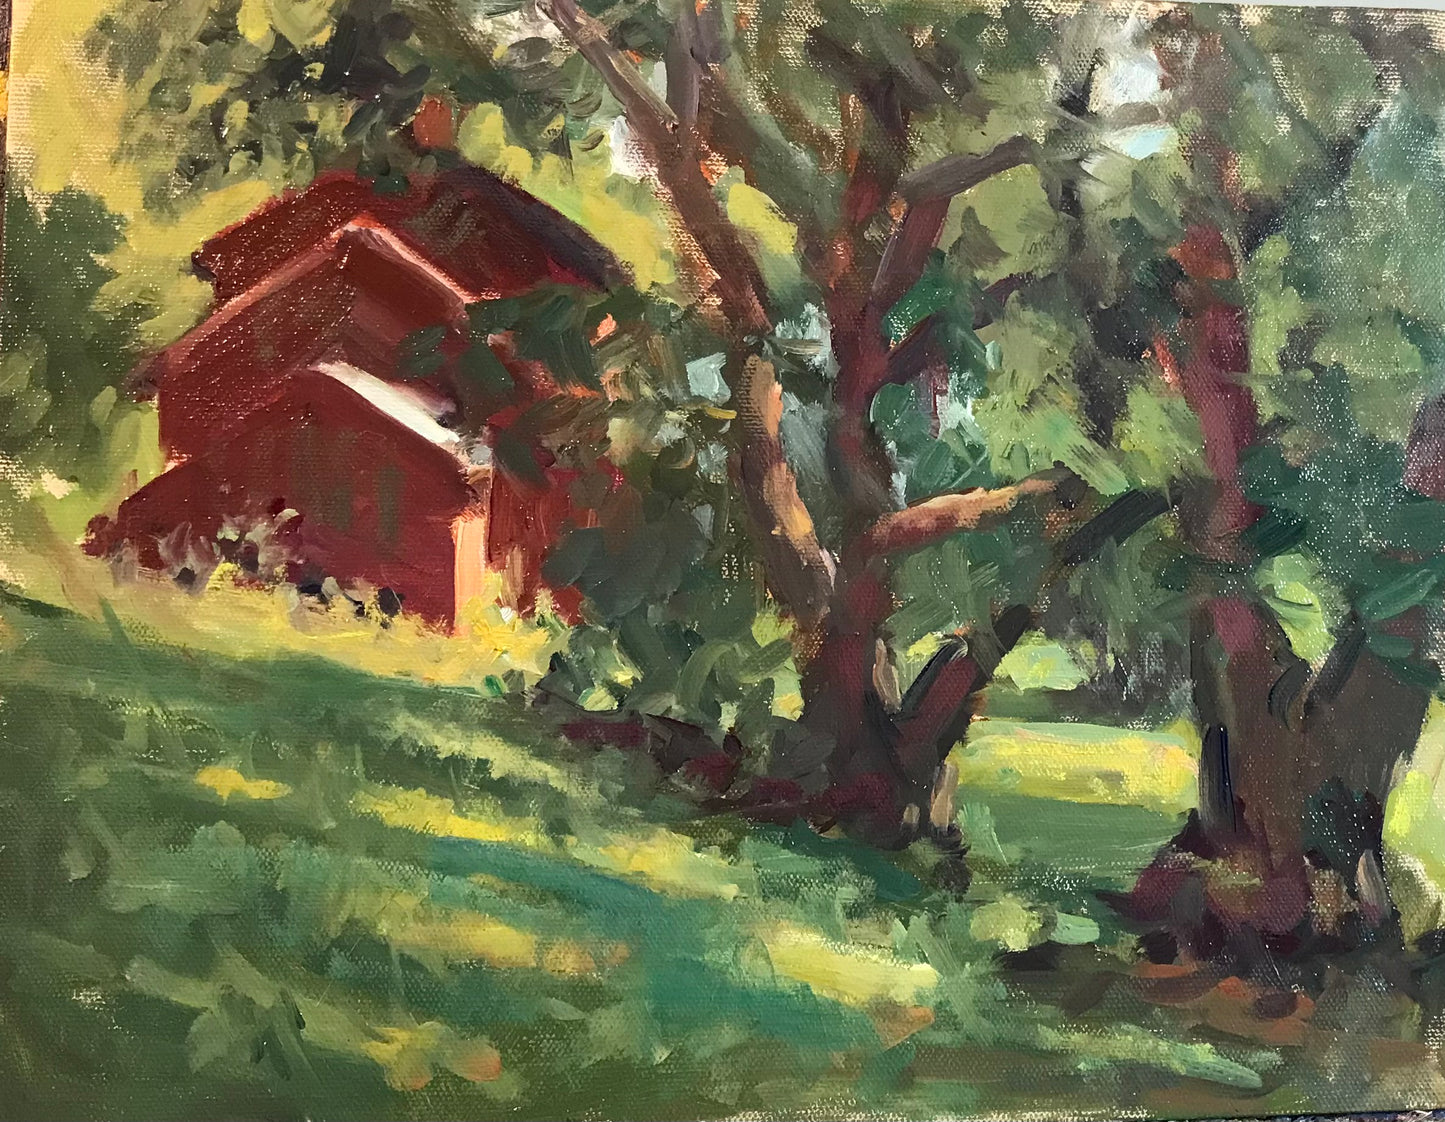 The Barn Seen from Under Trees (11 x 14 Inches)